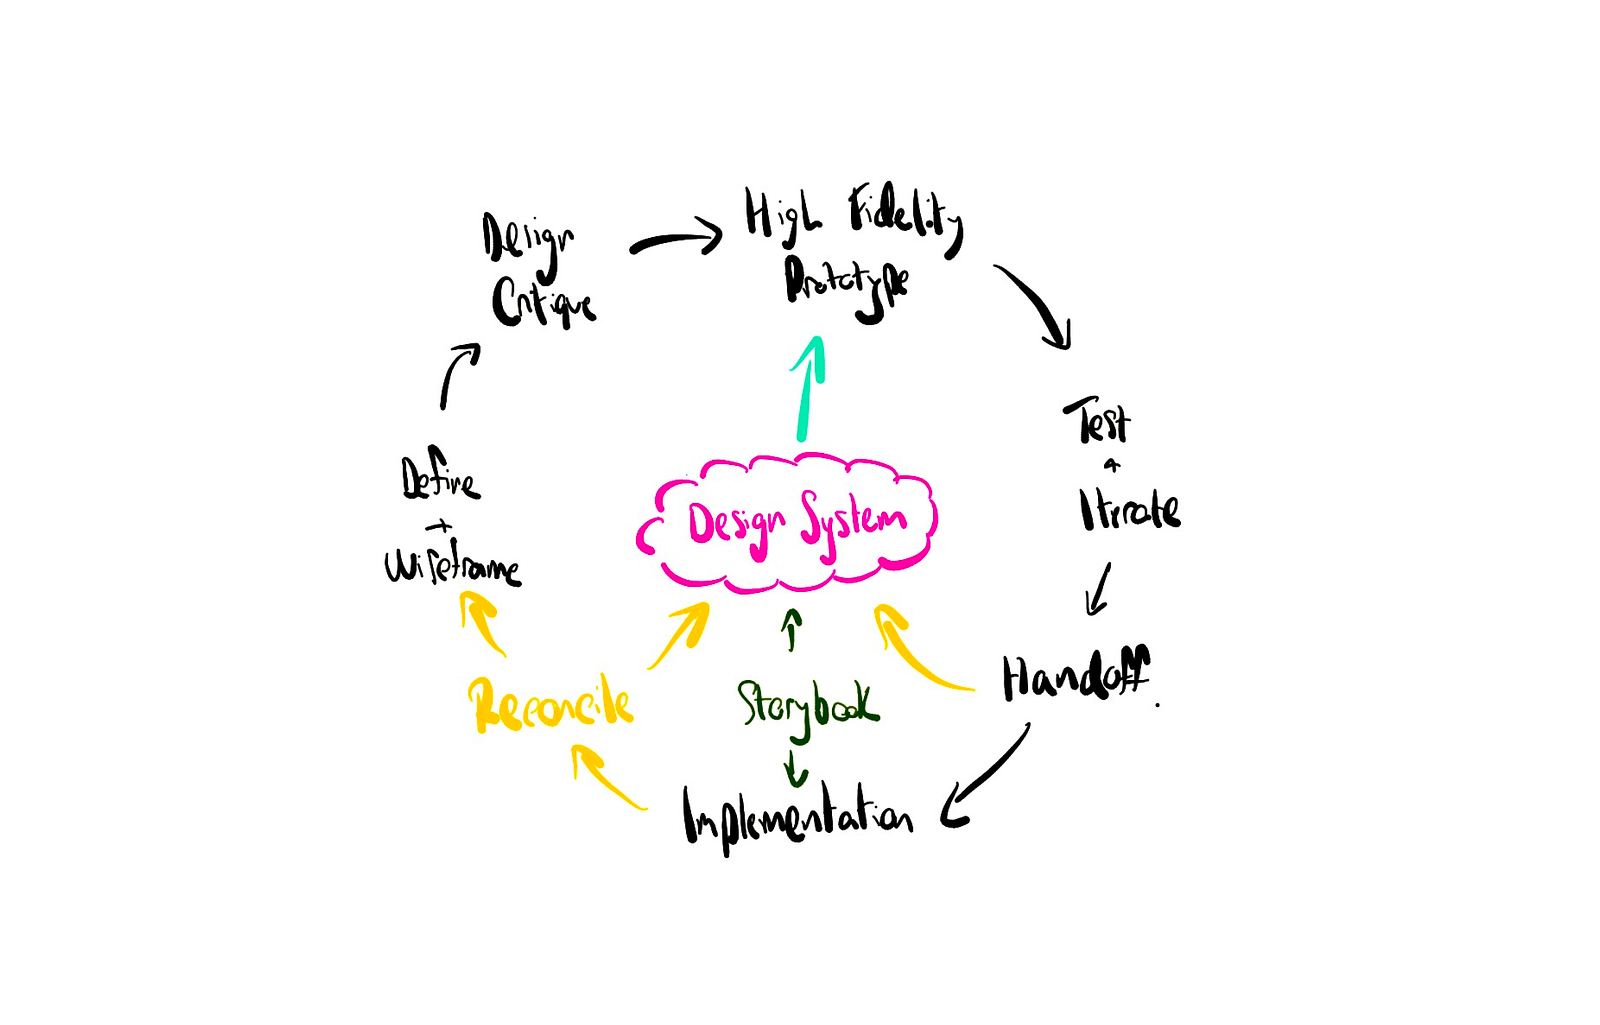 A product development process arranged as a lifecycle with arrows, focusing on the design process, and in the centre is “Design System” in a cloud shape.